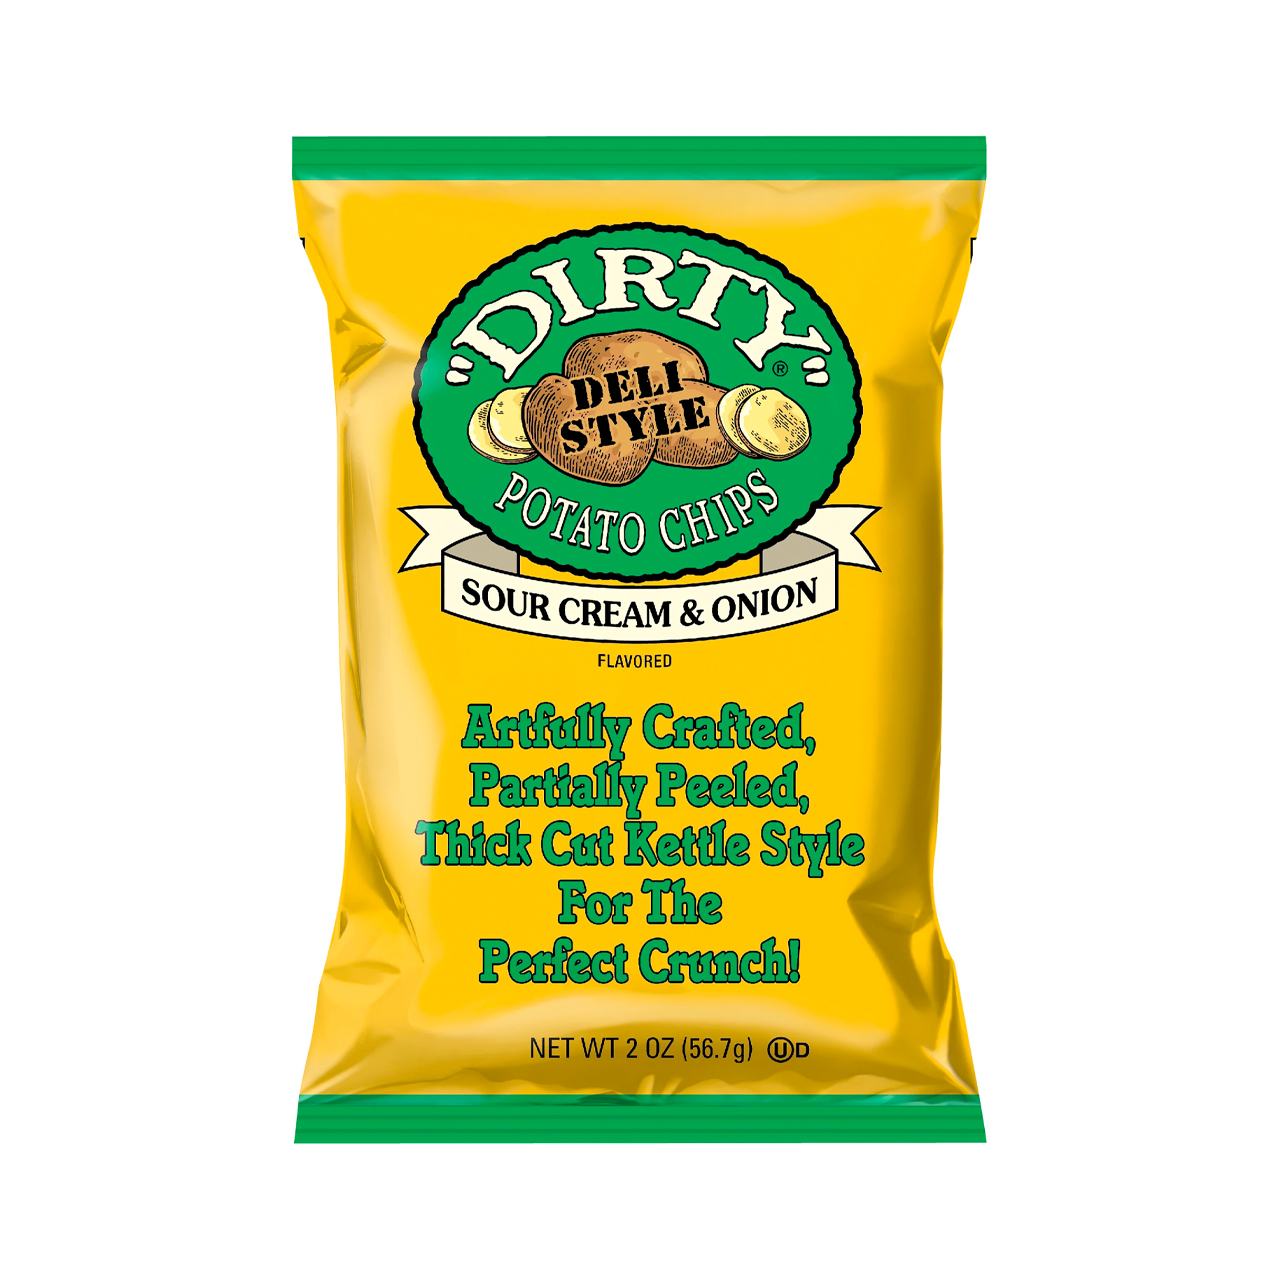 Lay's Sour Cream and Onion Potato Chips - 1.5 Ounce Bags - 12ct Box